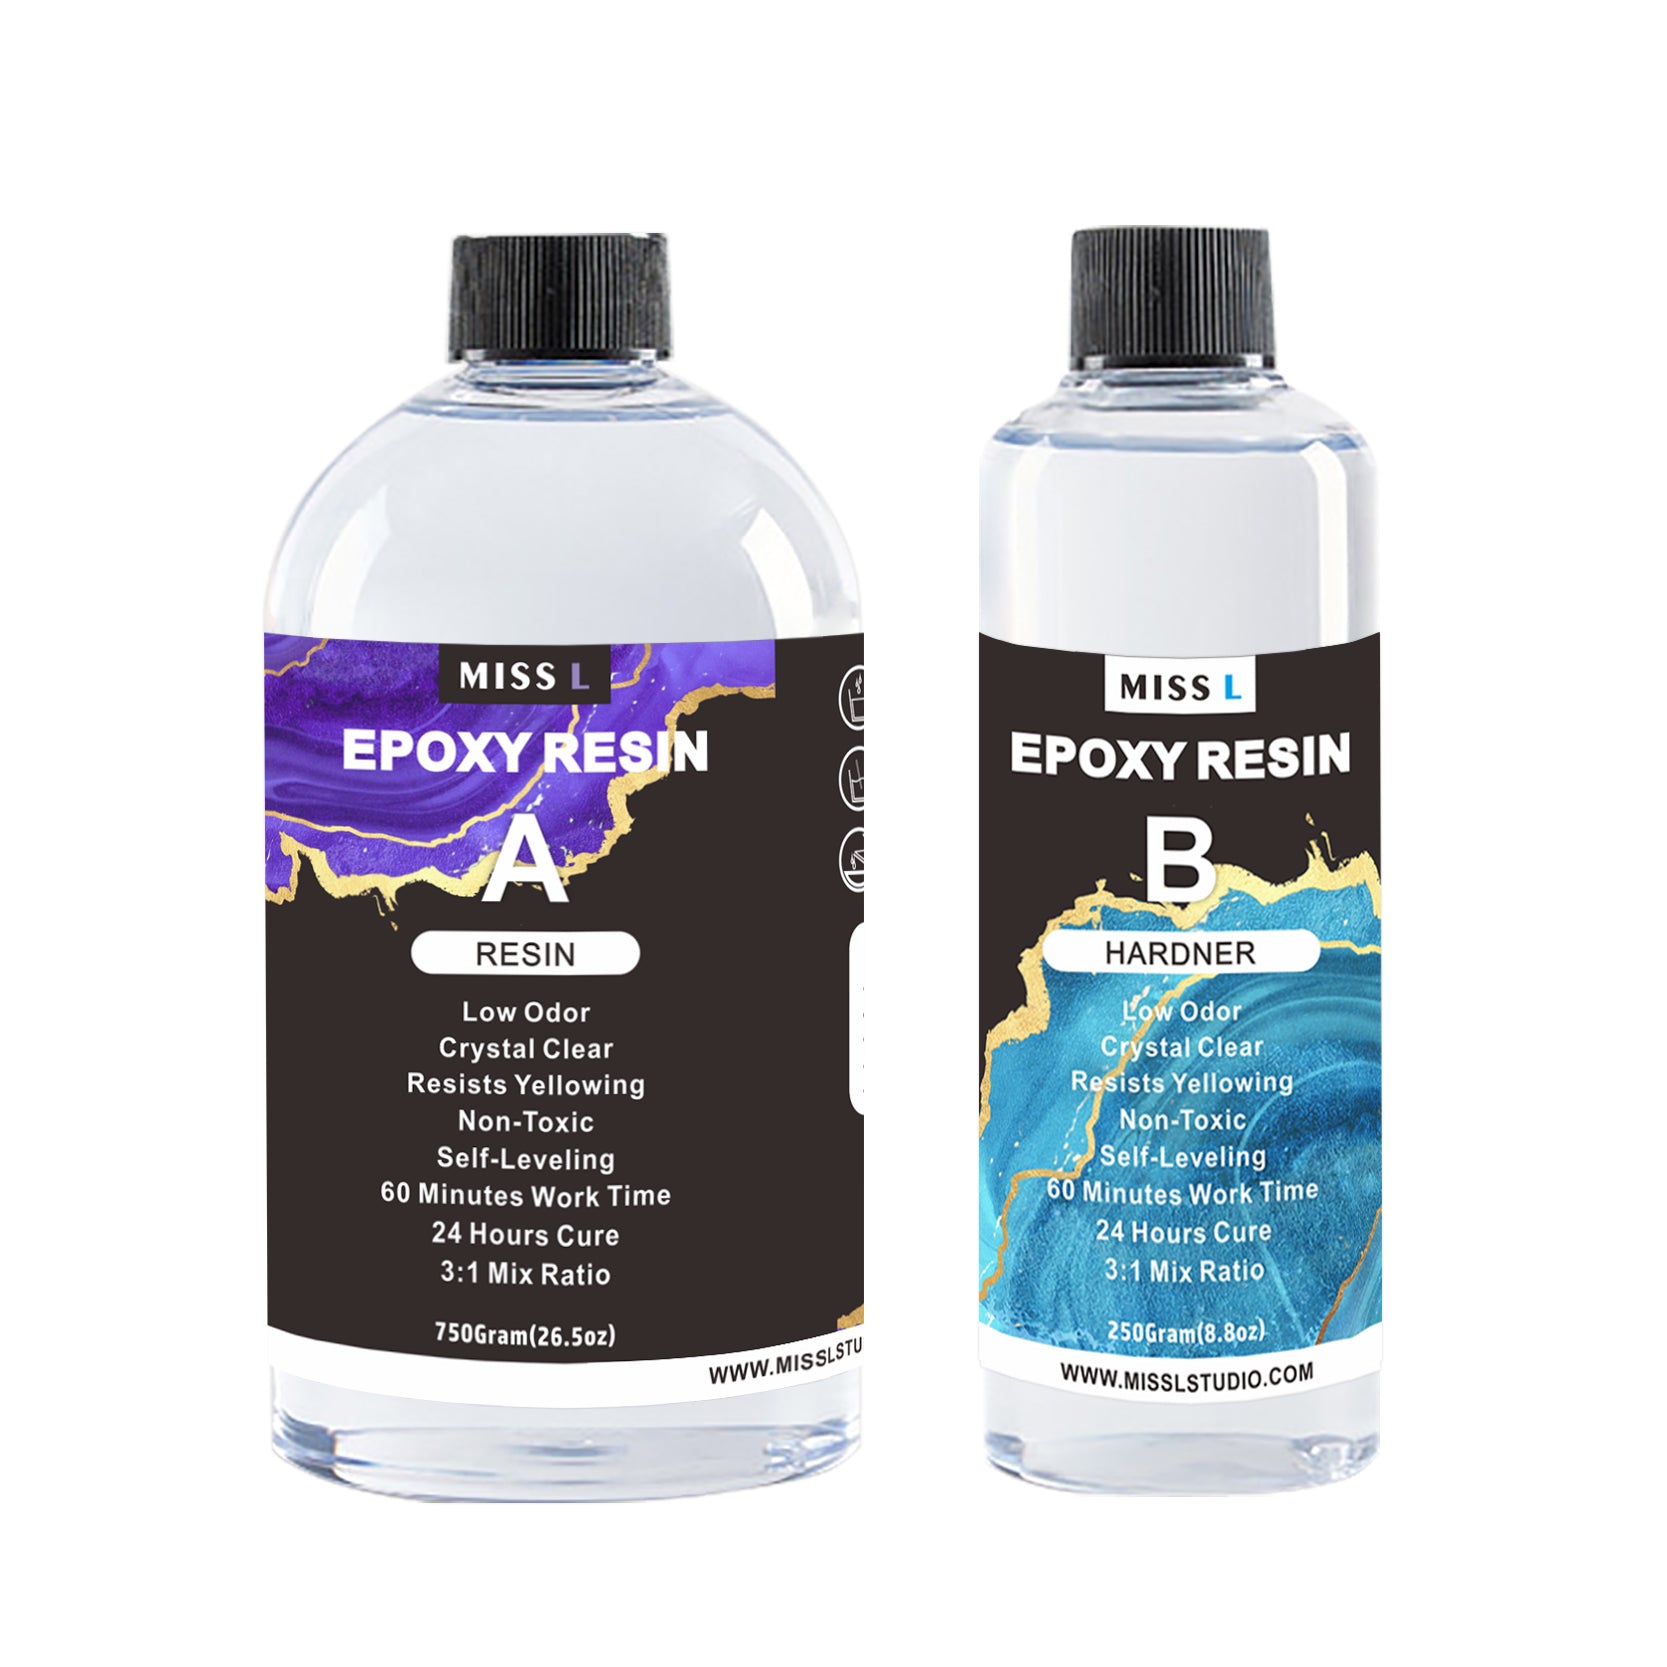 UltraClear Epoxy Sales and Coupons Deals